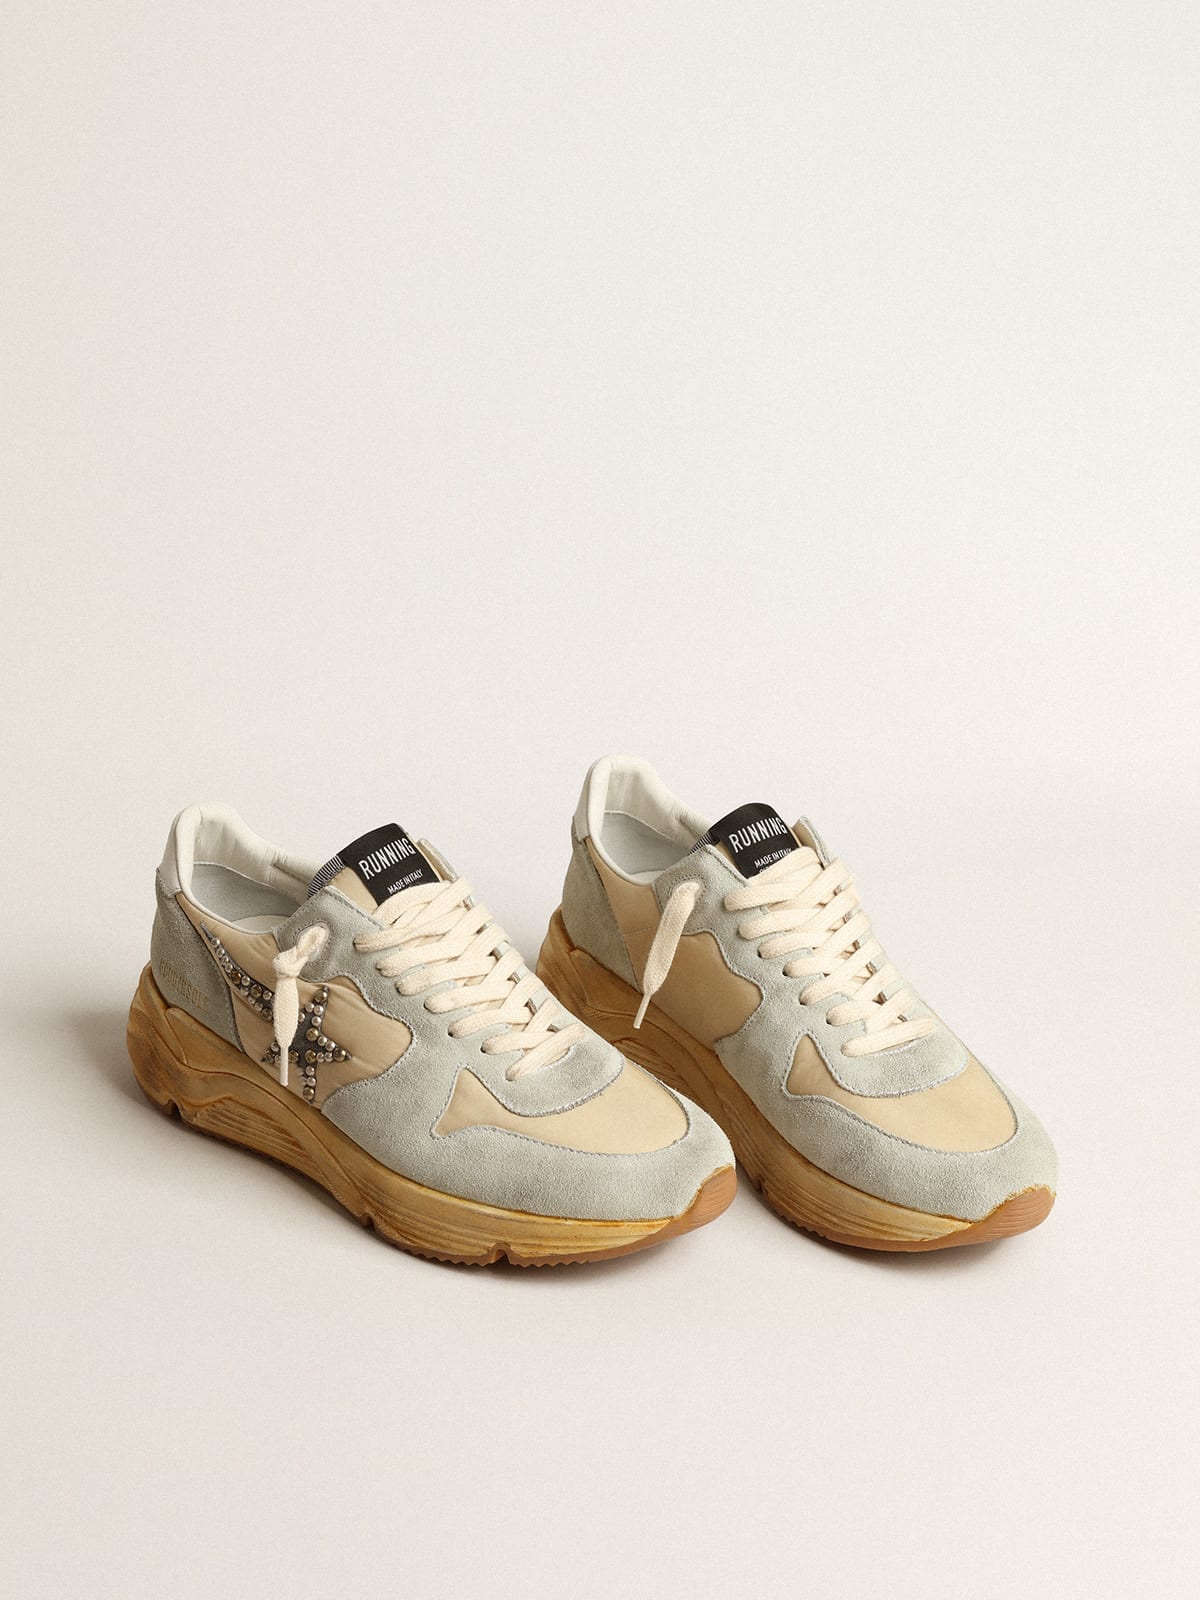 Golden Goose - Women’s Running Sole in ice gray with studded suede star in 